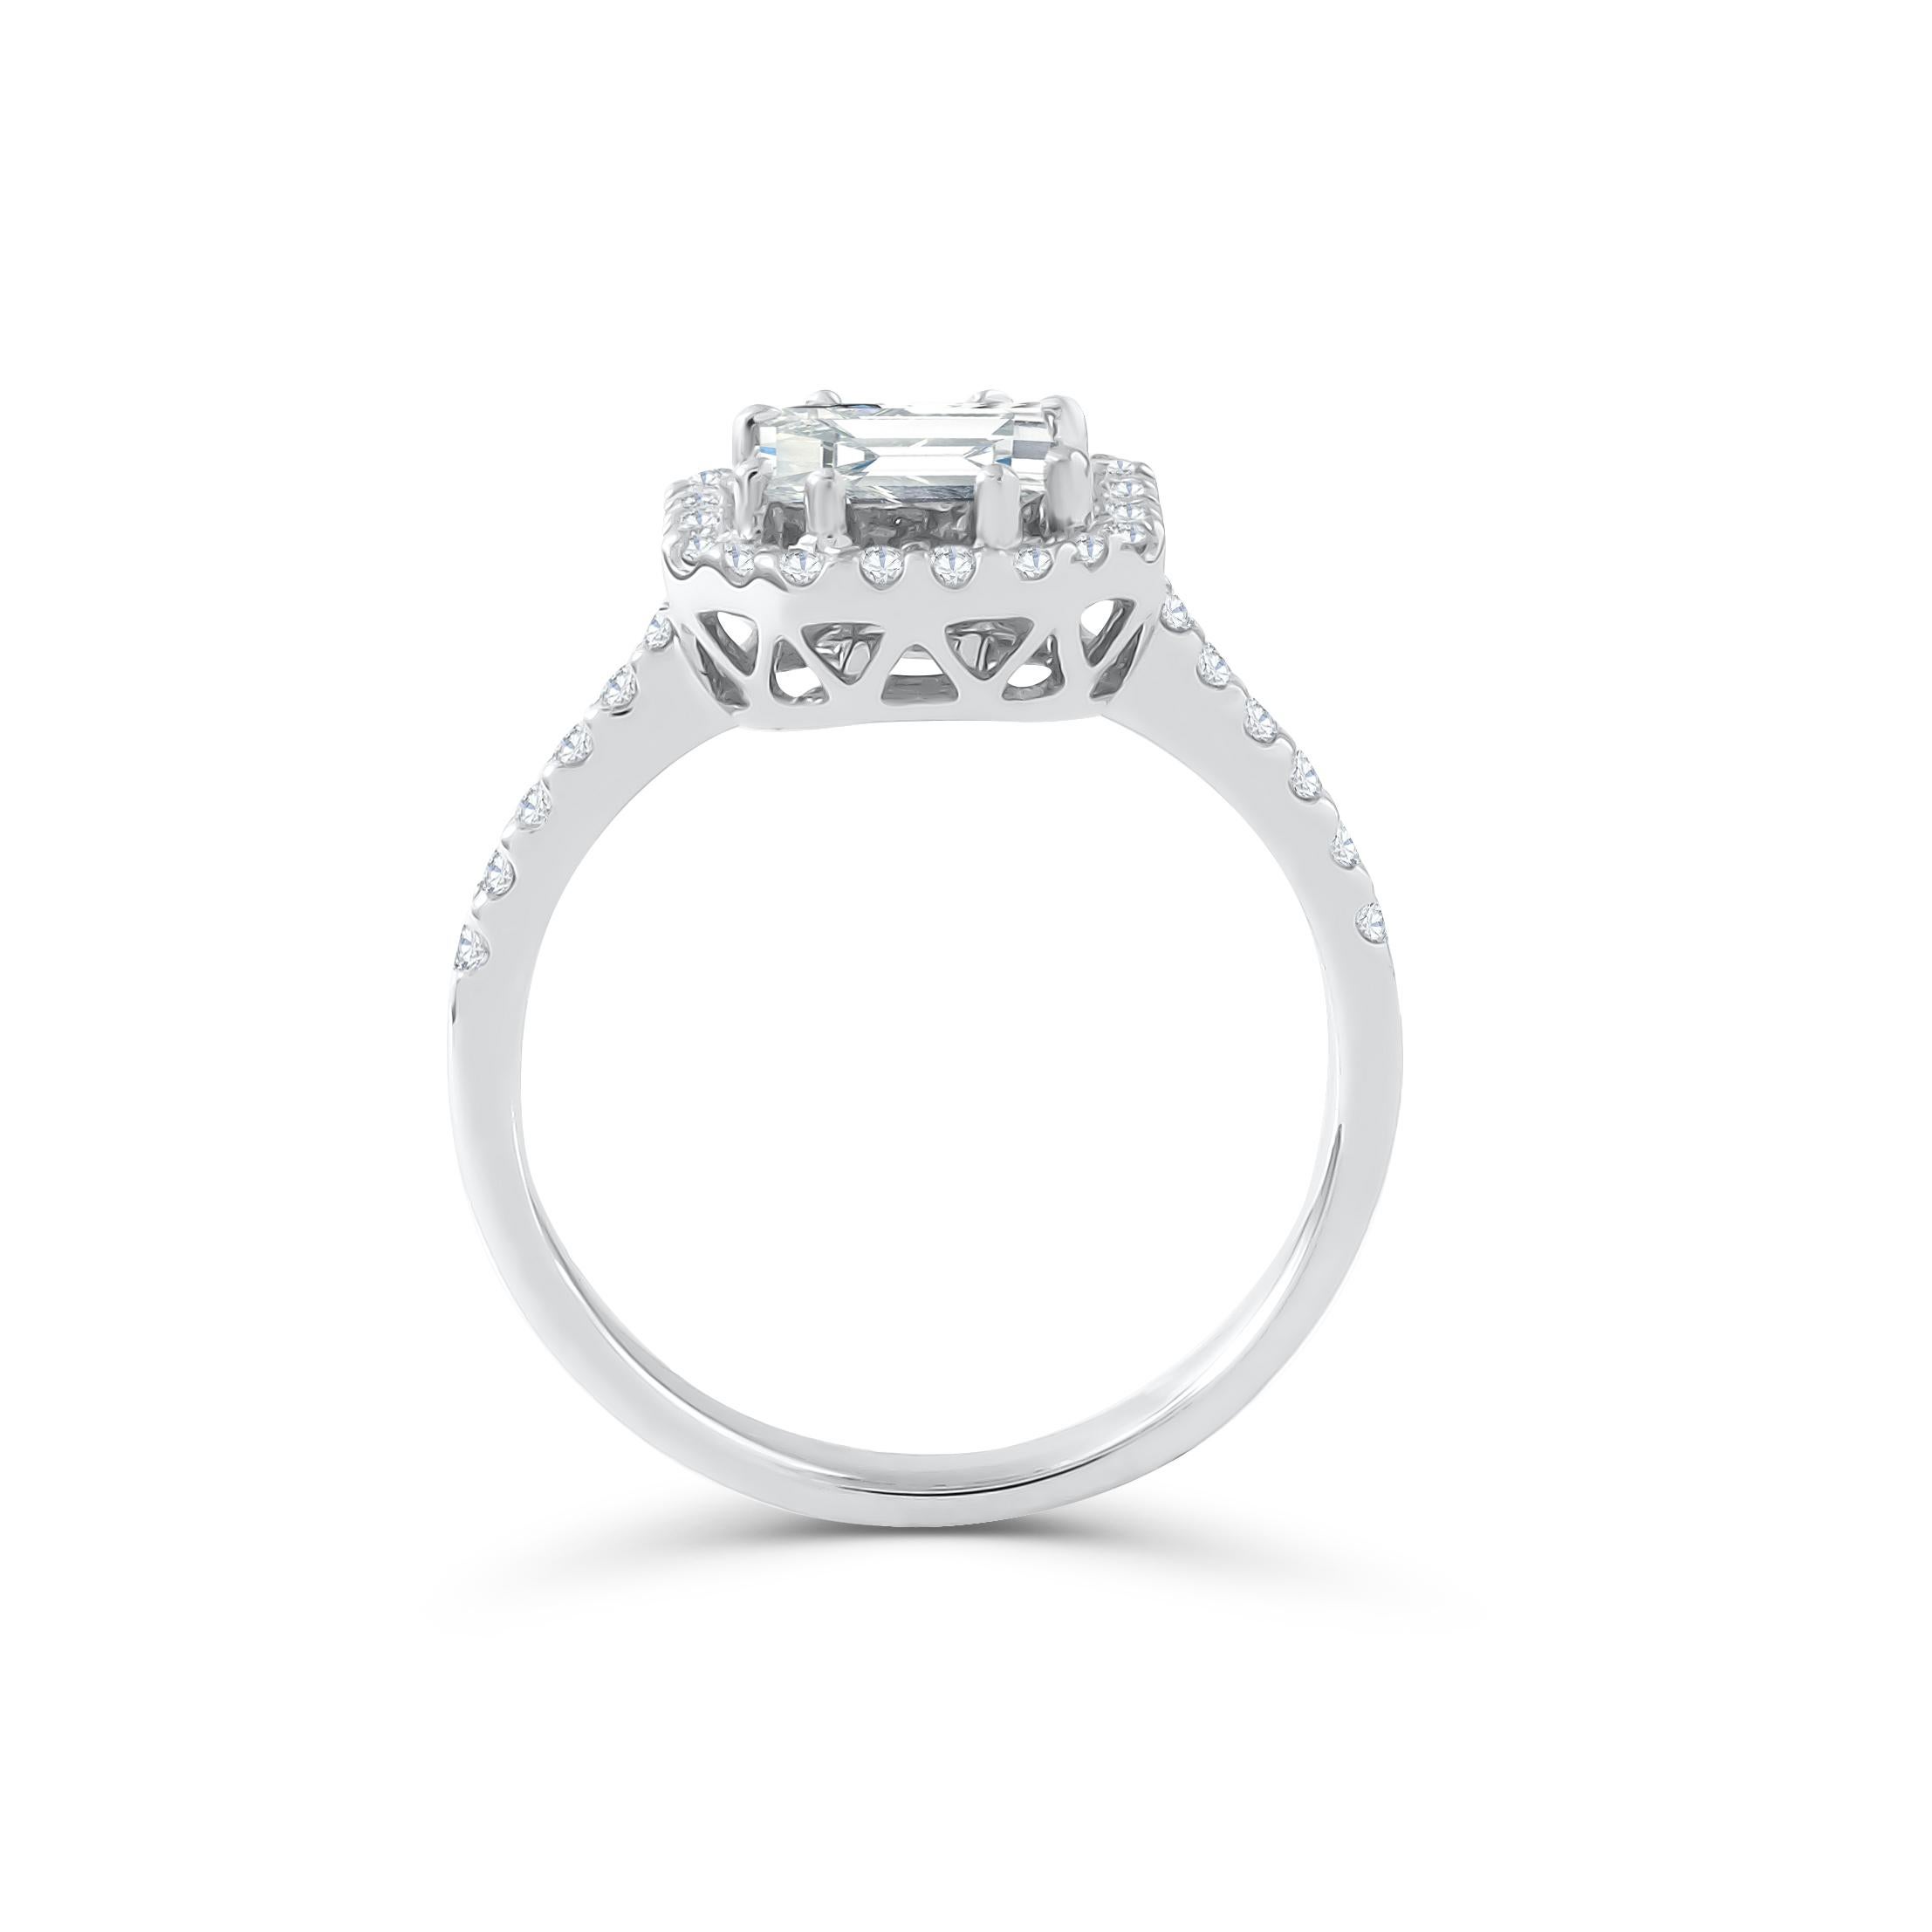 This diamond ring has a Emerald shape Illusion (Pie Cut) to create the look of a 2.50 carat single Emerald cut stone surrounded beautifully with brilliant round diamonds, Handcrafted in 18 kt white gold. This Ring will add a touch of sophistication